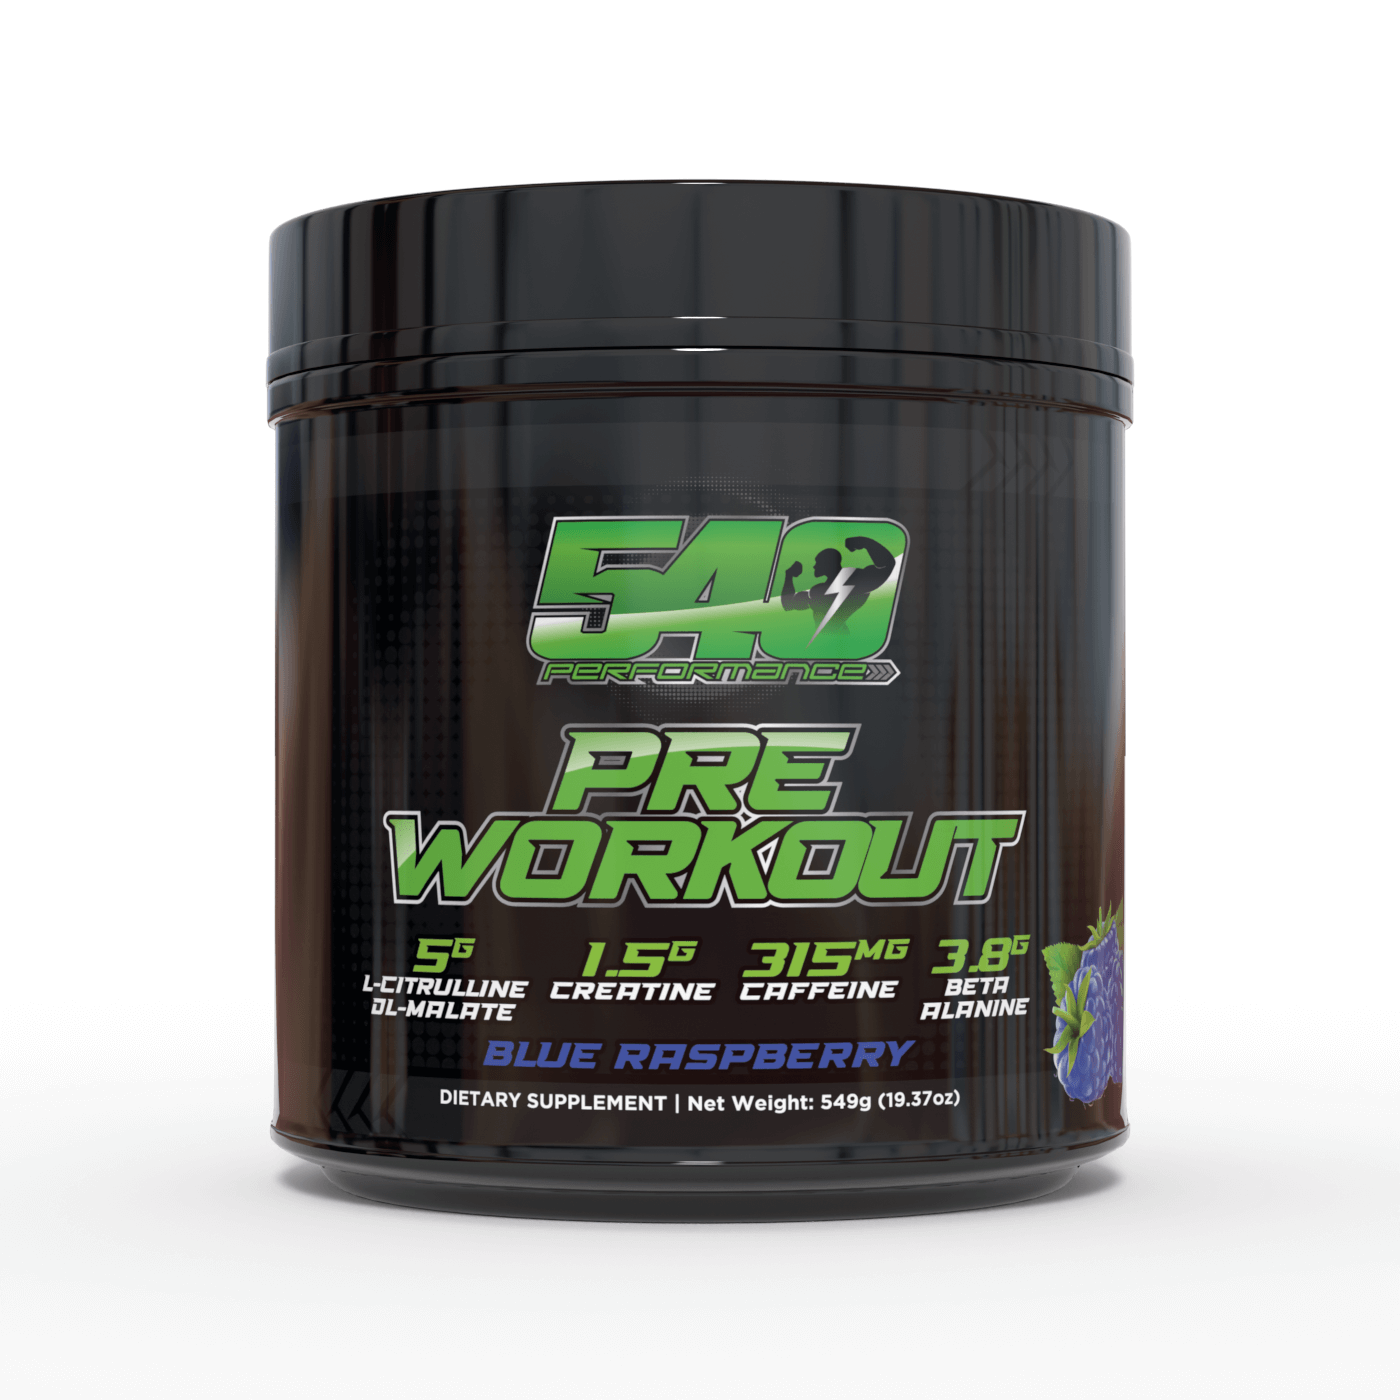 Black container reading “540 pre-workout” in green text